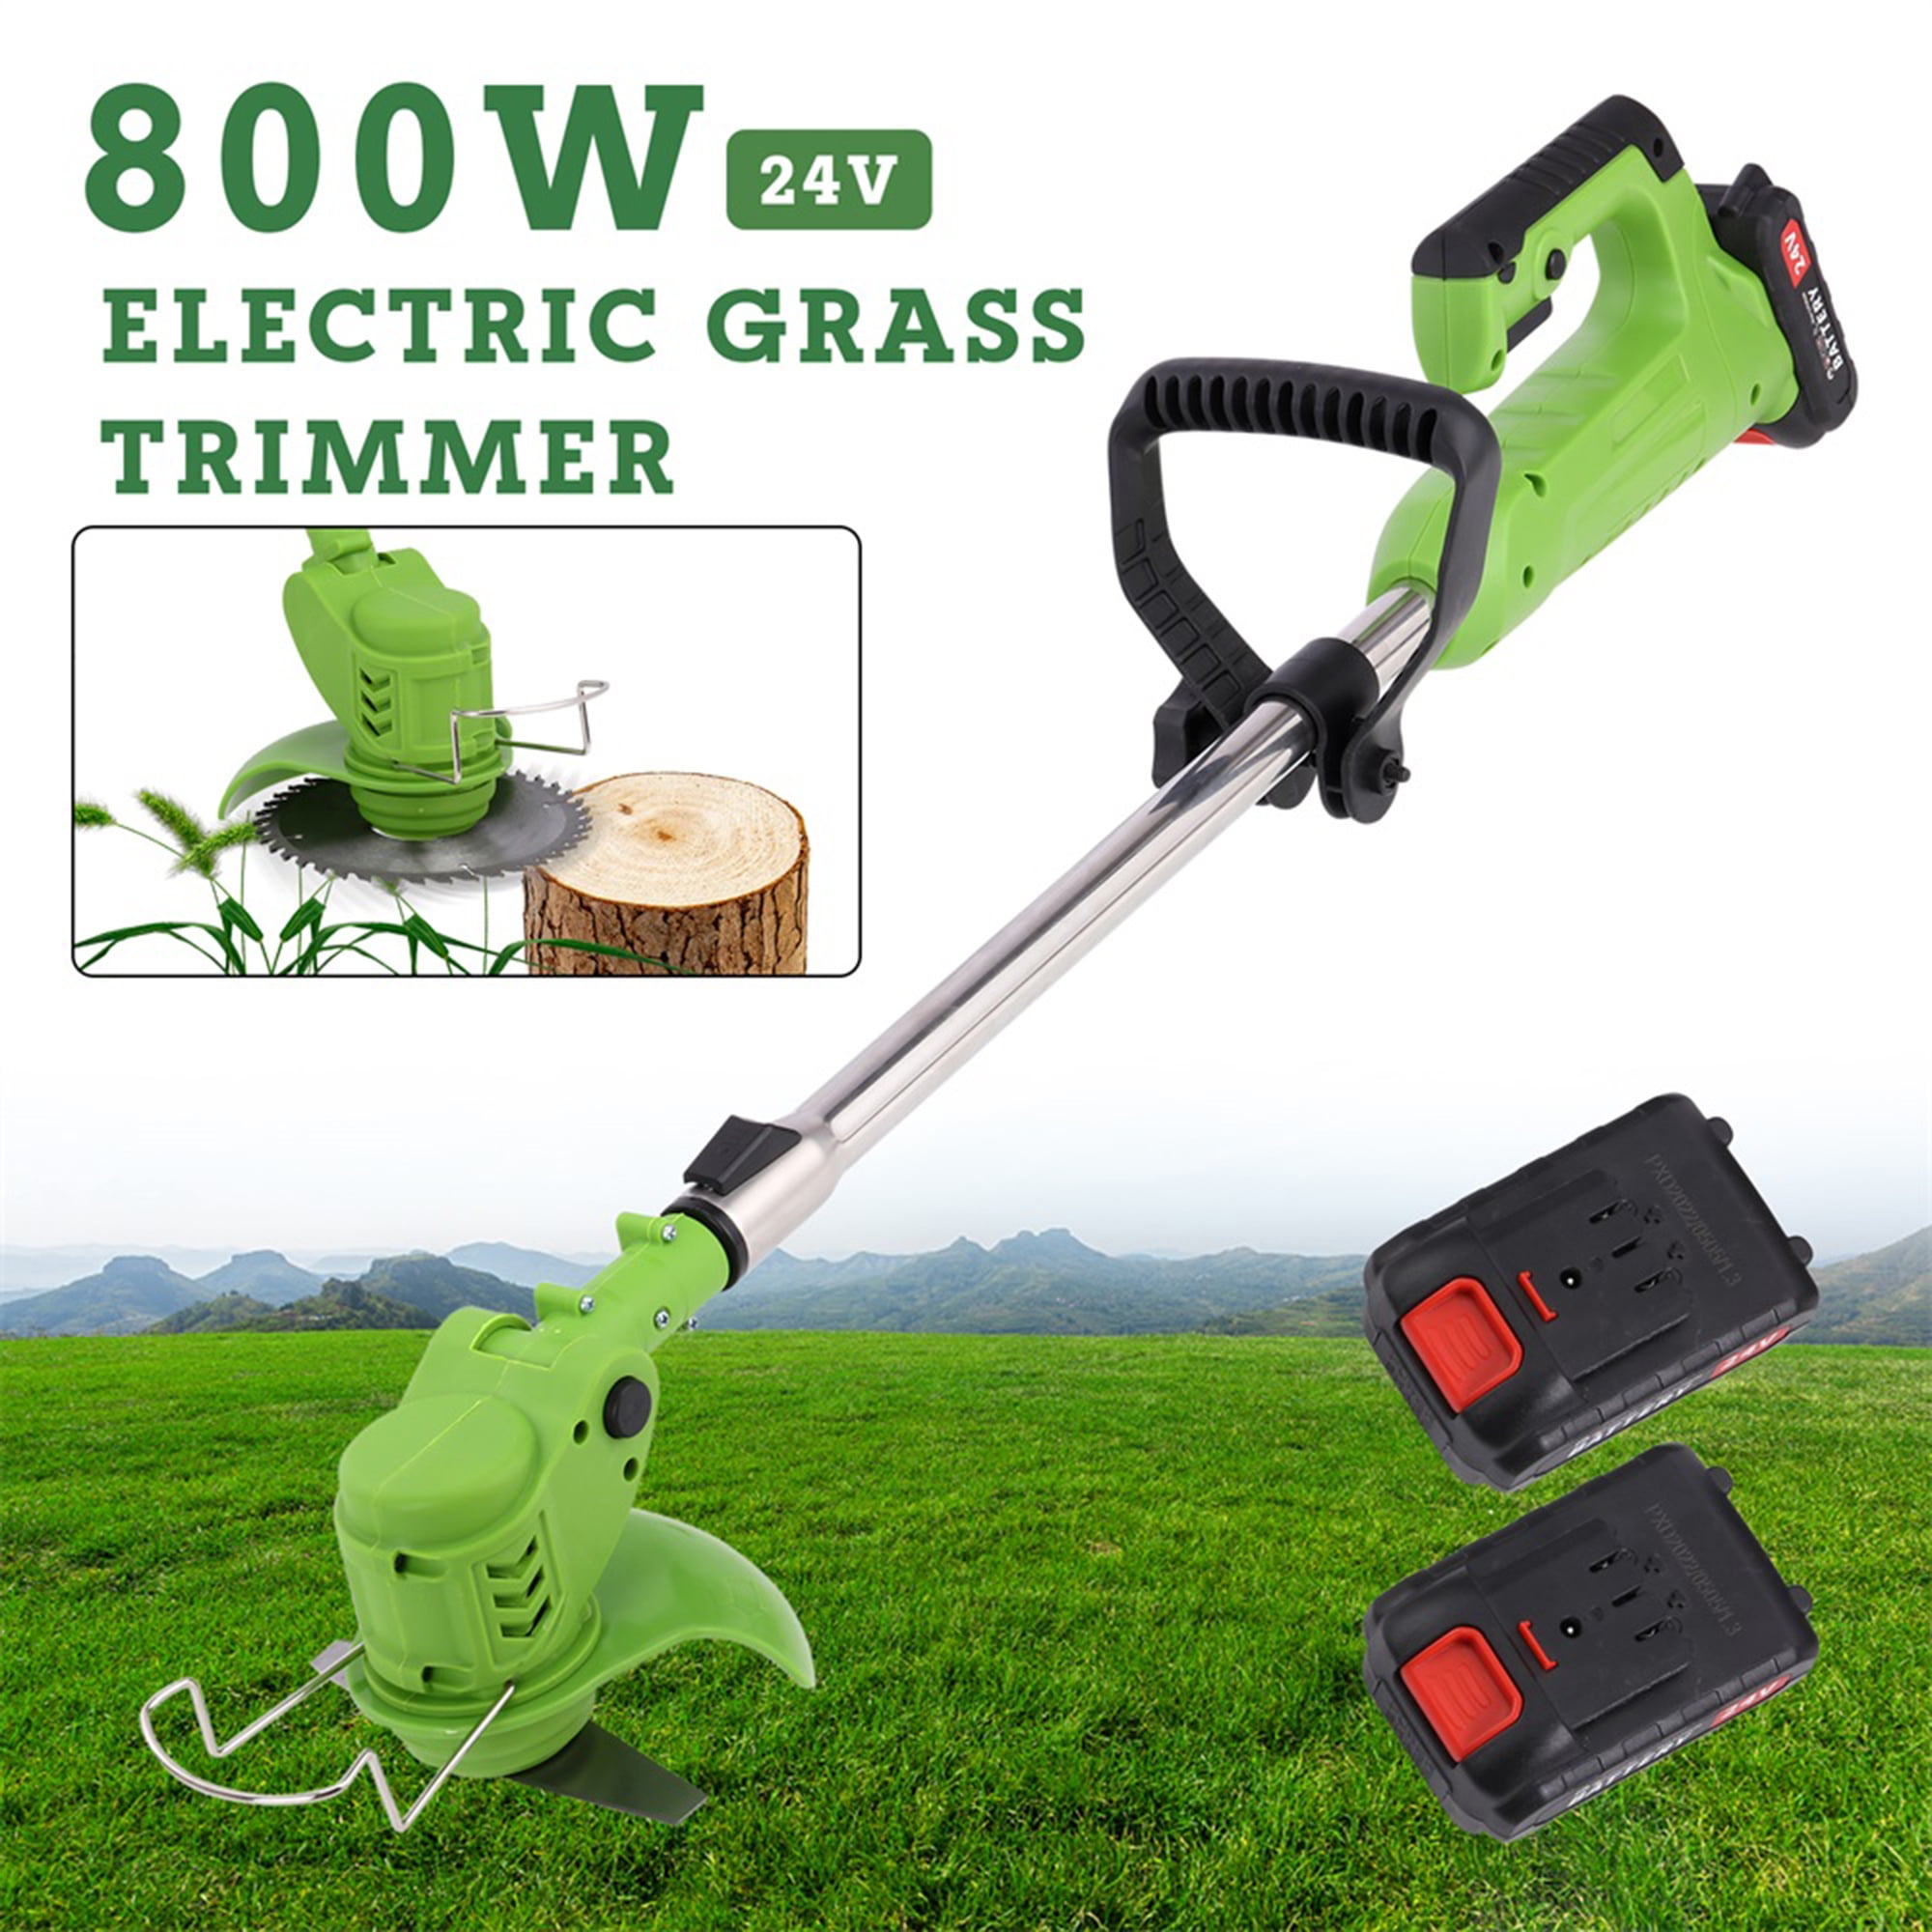 DODOING 24V Electric Weed Lawn Grass Cord Trimmer Cutter, Rechargeable Grass Trimmer & Edger Lawn Mower Weeder Weeding Machine Grass Cutter w/2 Battery 1 Charger - Walmart.com